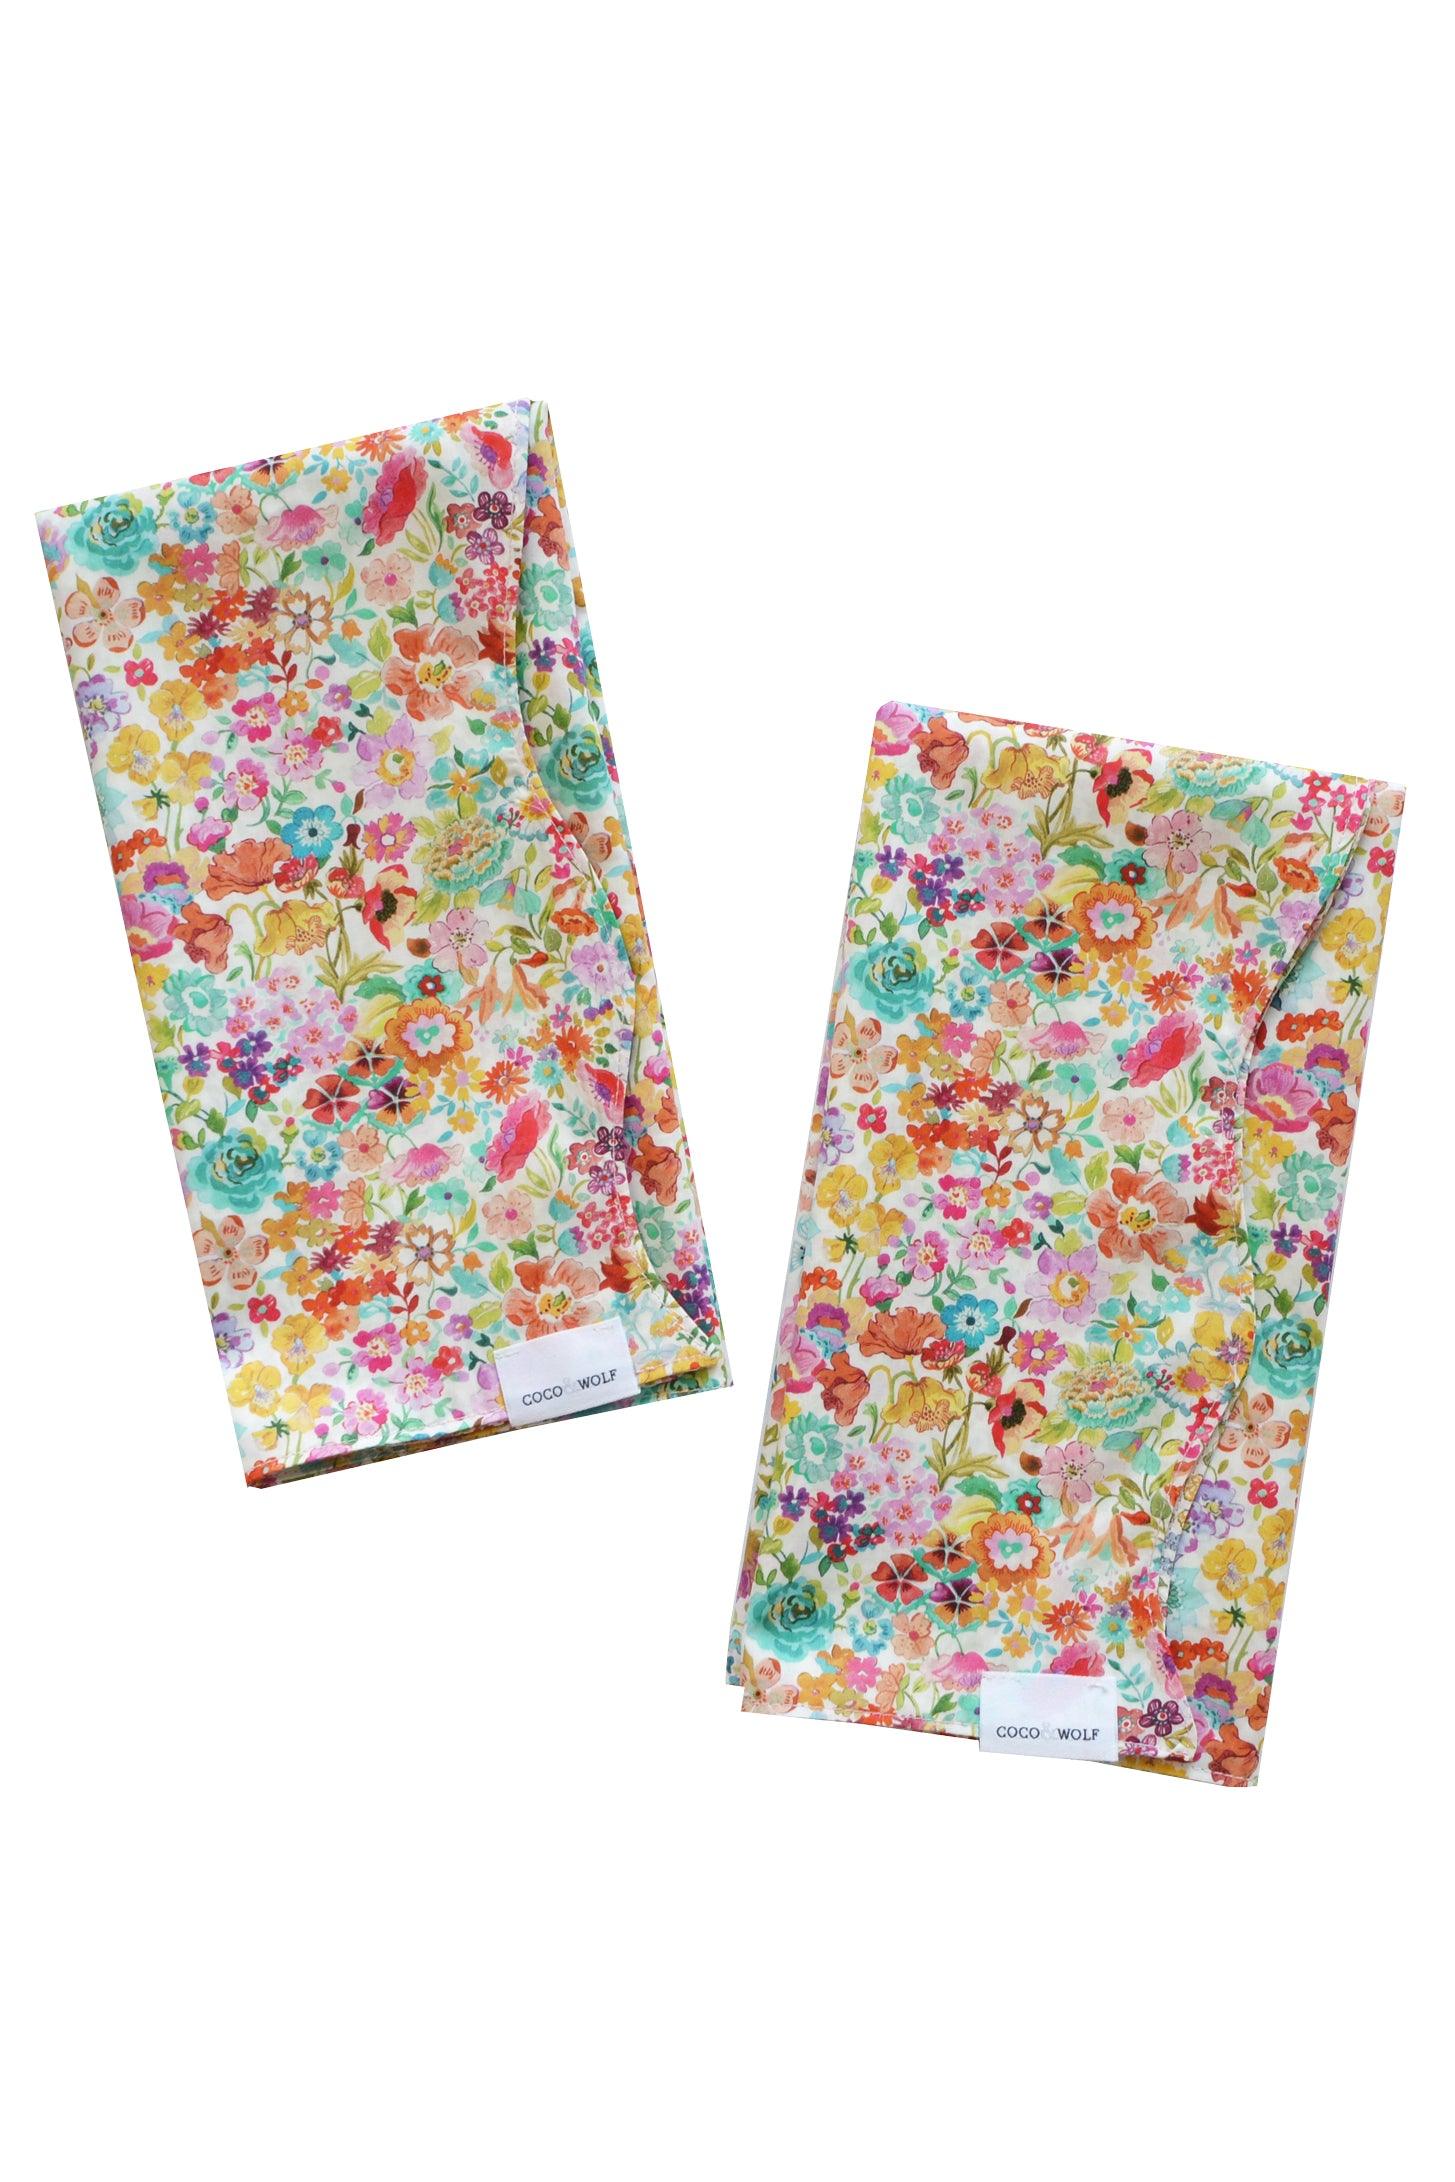 Wavy Napkin Set made with Liberty Fabric CLASSIC MEADOW & LILIBET - Coco & Wolf